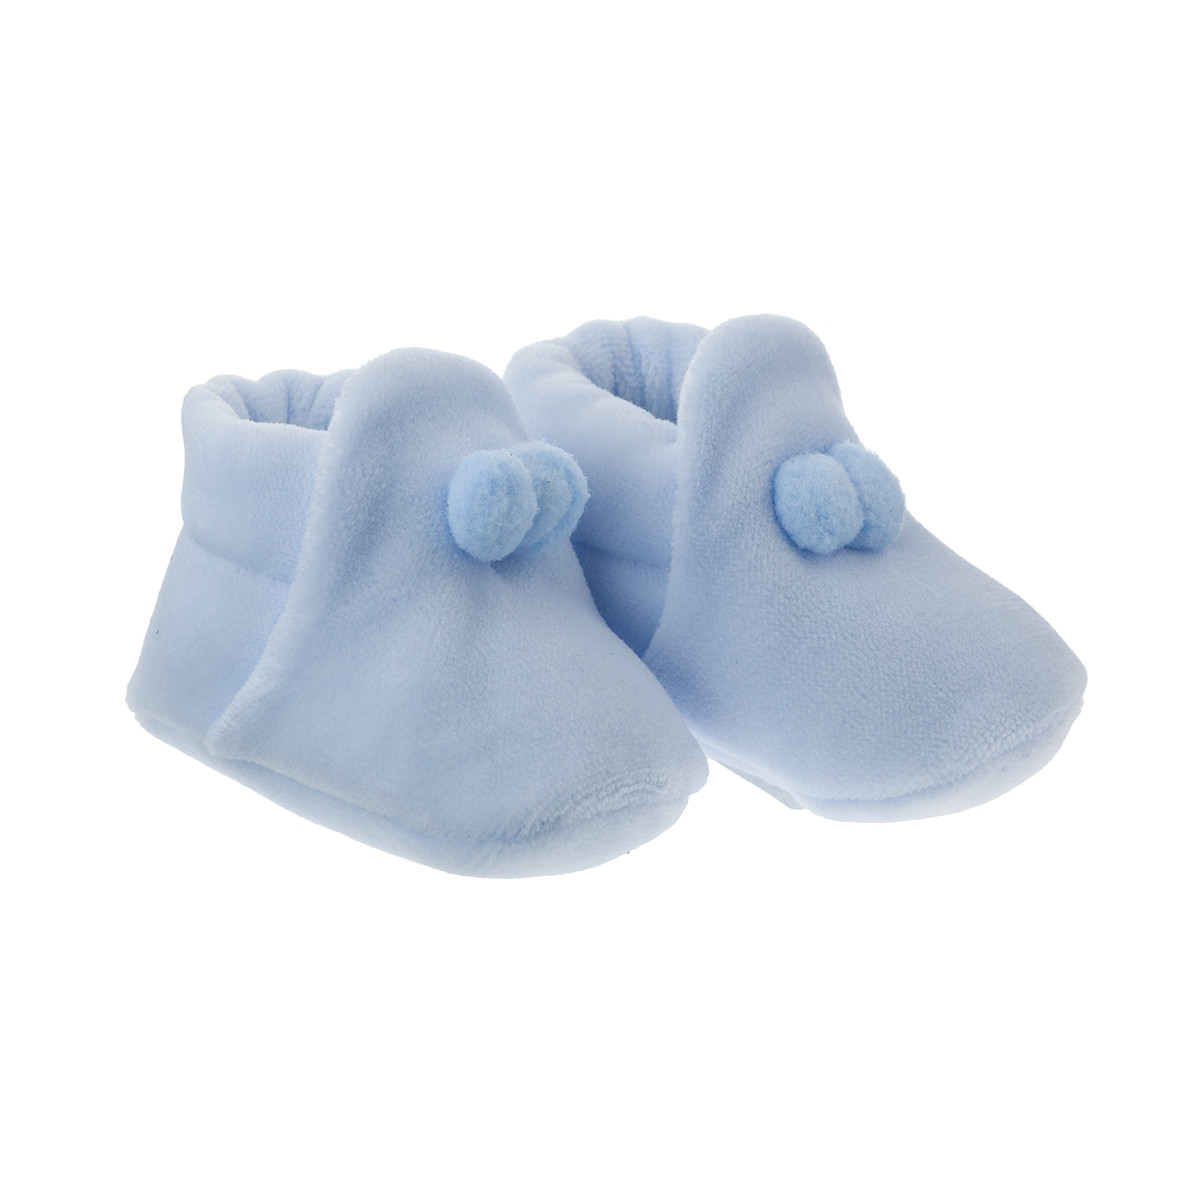 WINTER BABY SHOES MOD.2 BLUE CAMBRASS - 2